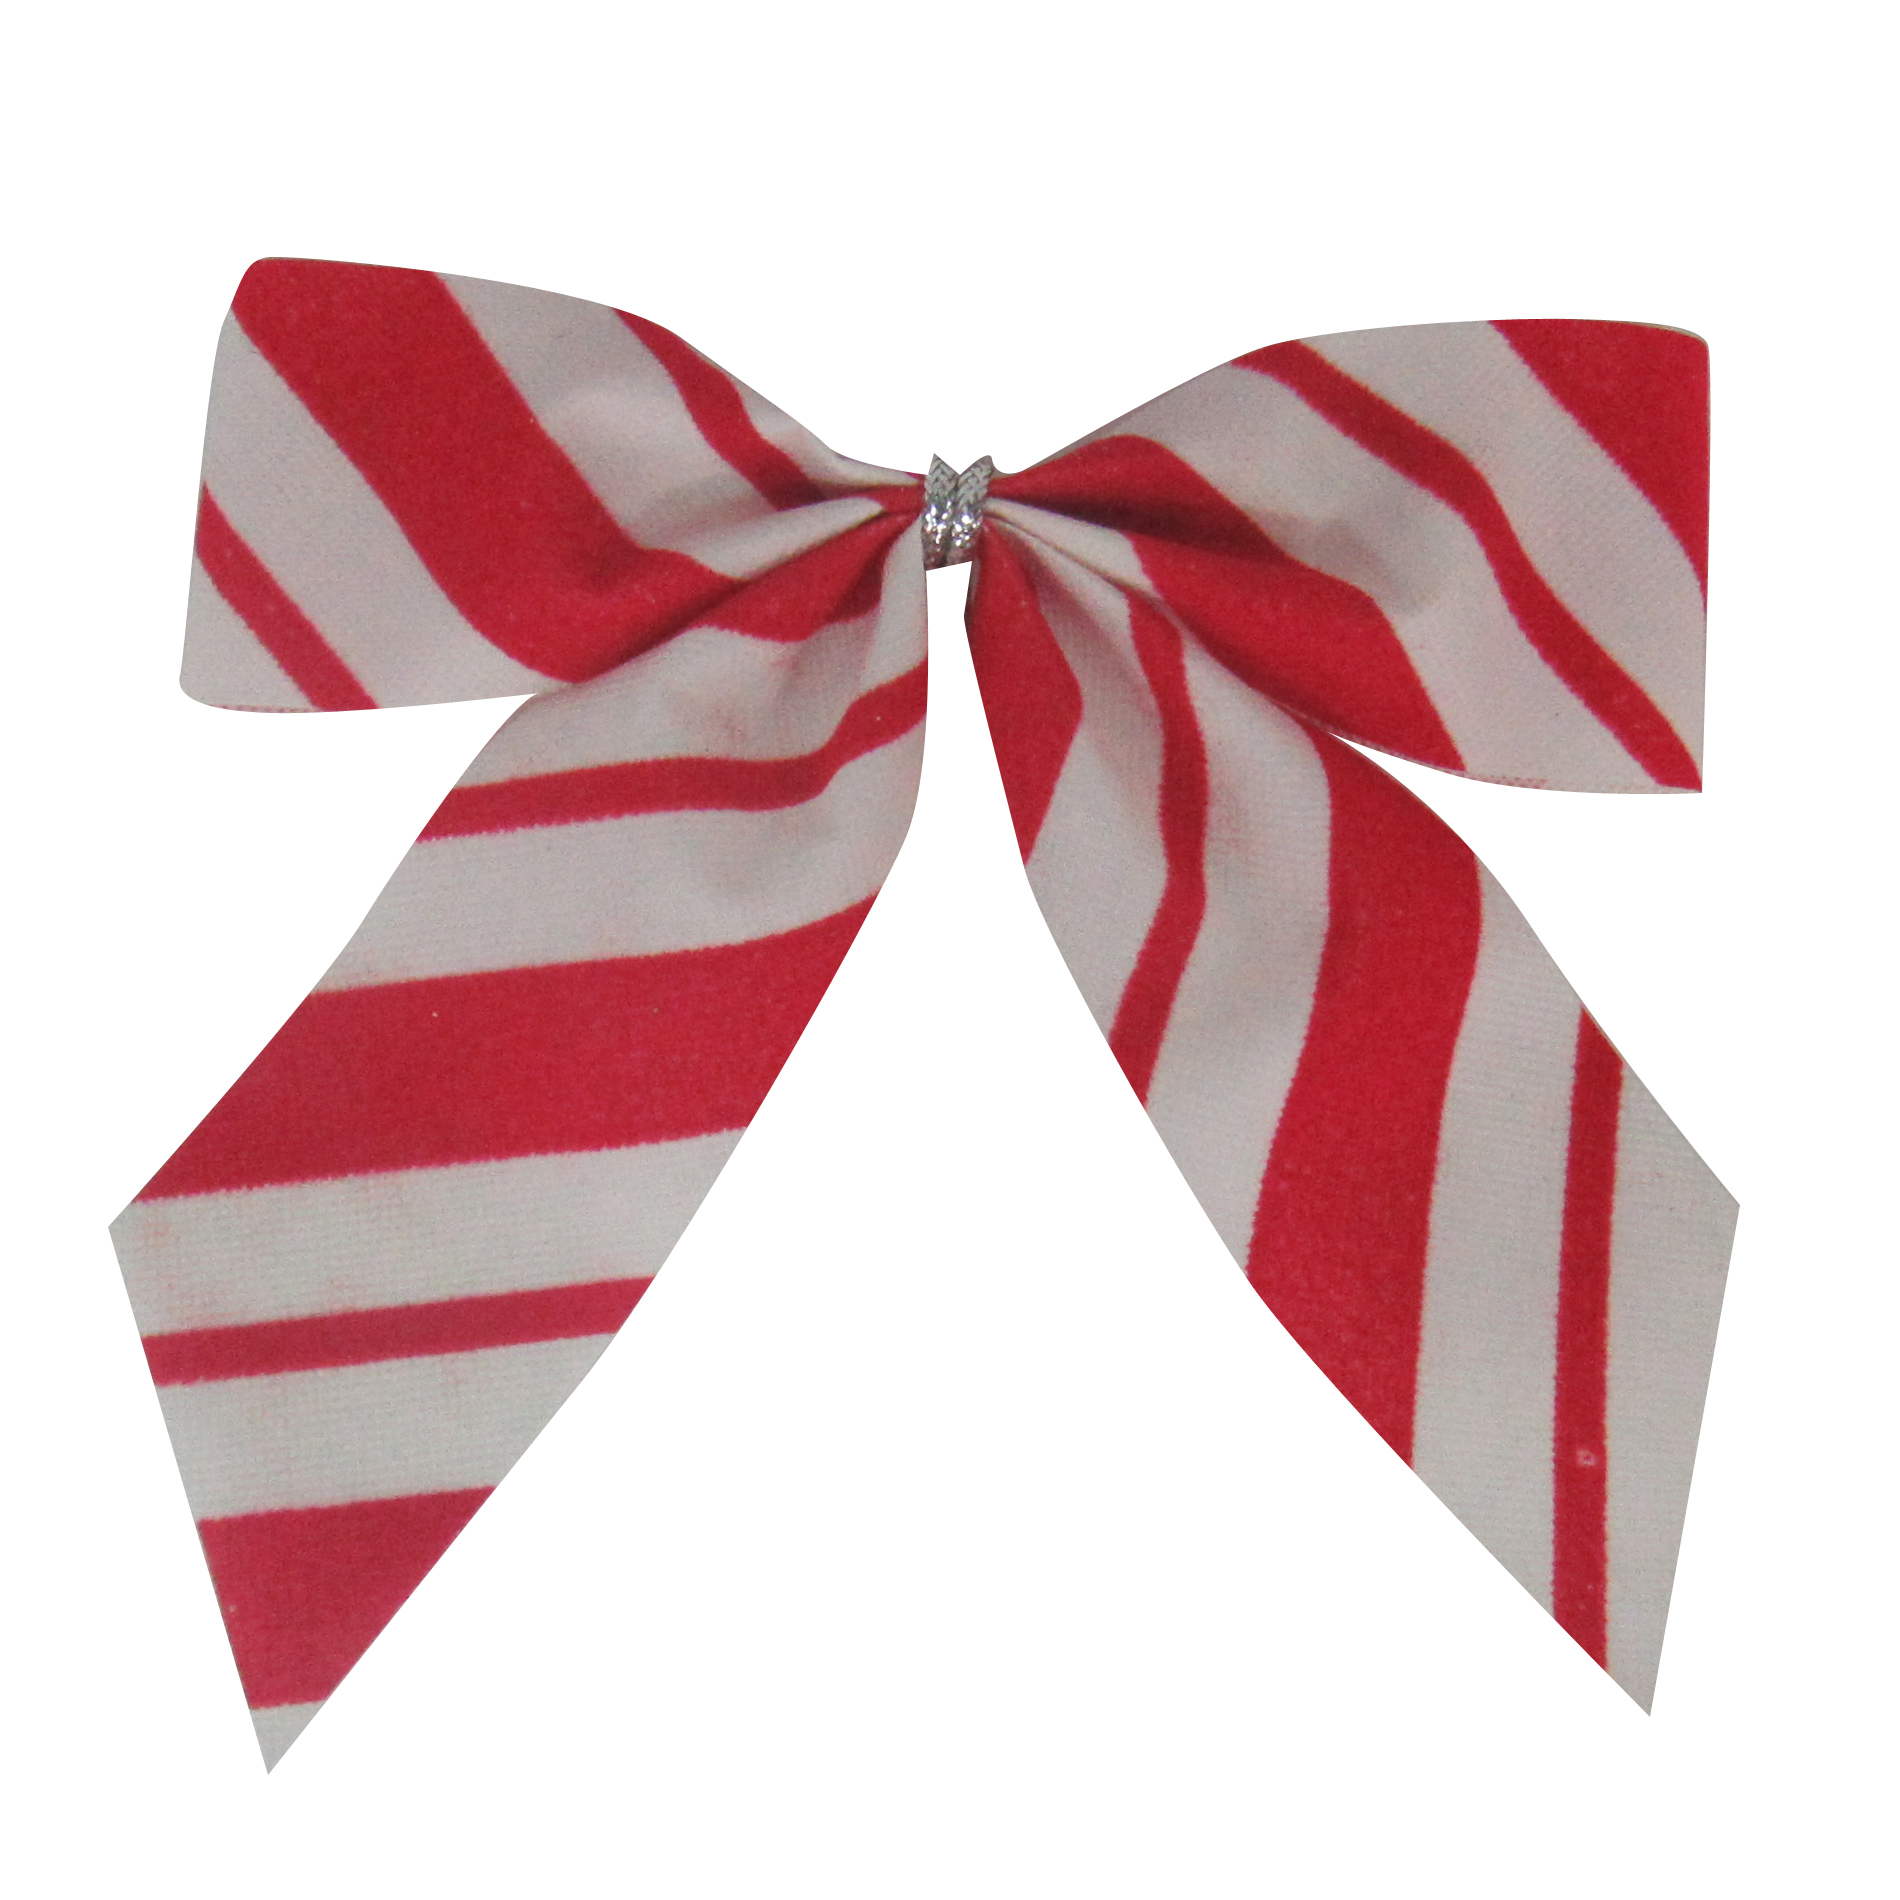 Trim-a-Home 12 Ct. Small Candy Cane Christmas Bows